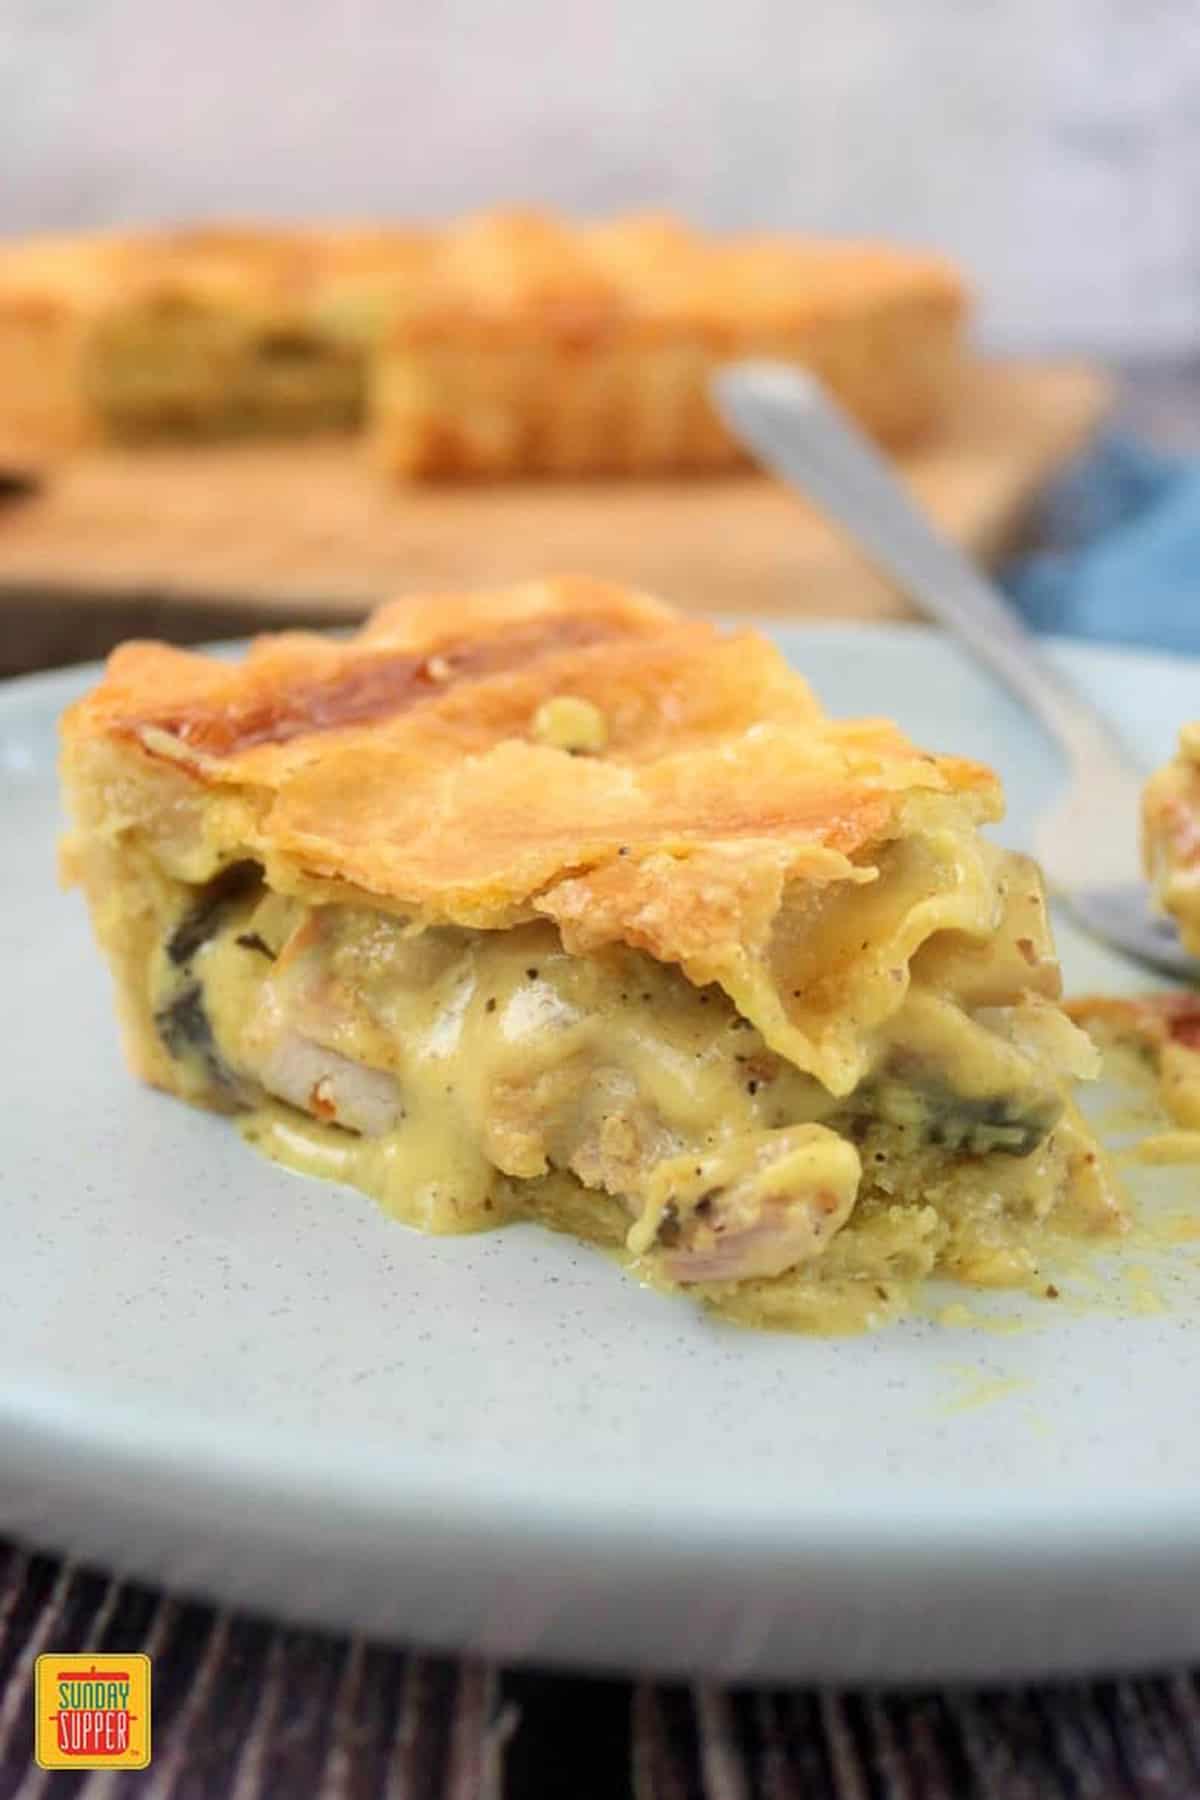 A slice of chicken pie on a light gray plate with a fork and the whole pie blurred in the background